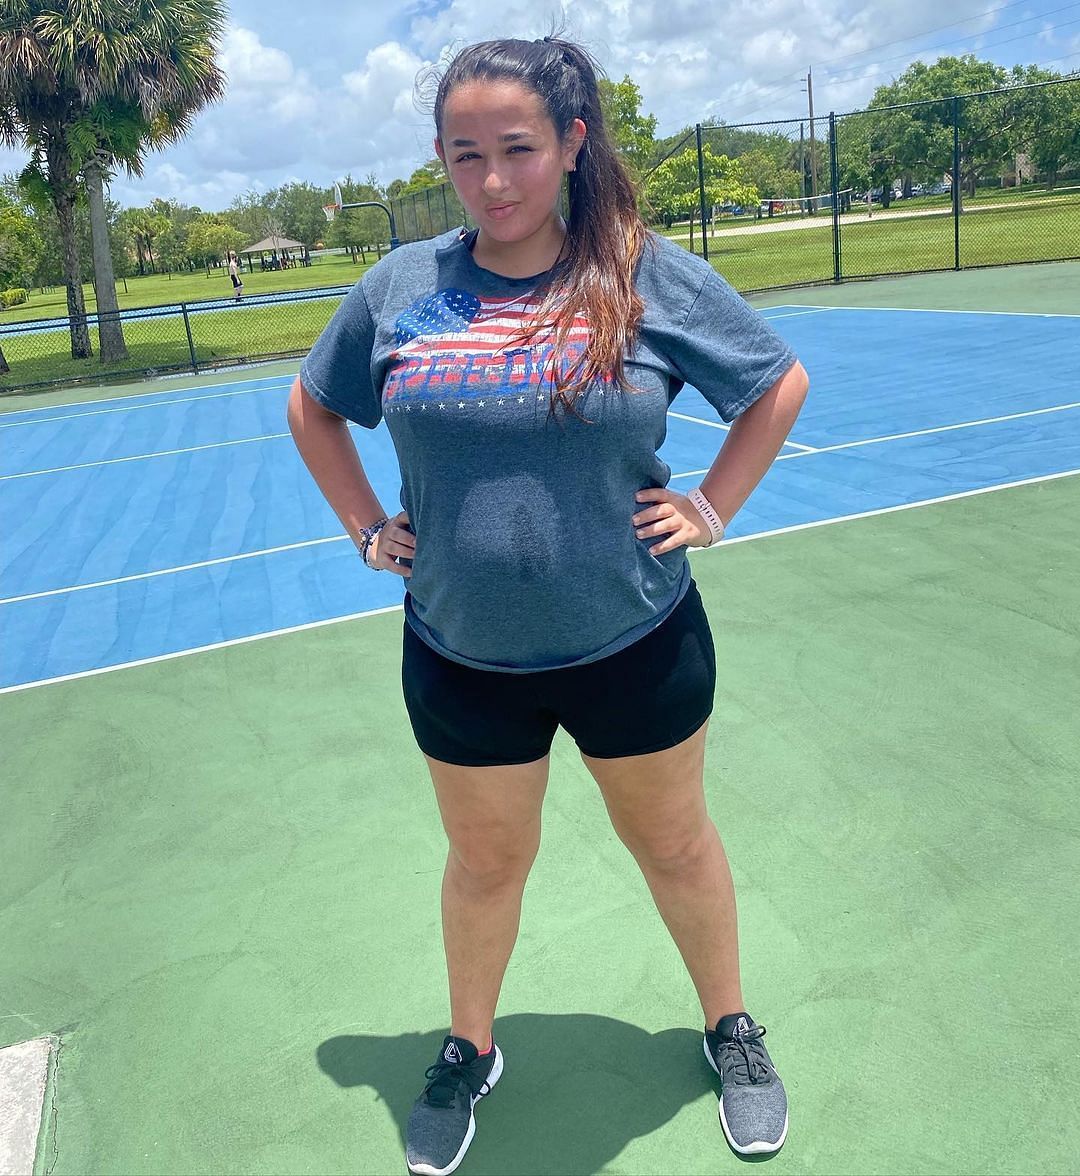 Jazz Jennings weight loss transformation included proper workout routine. (Image via Instagram)